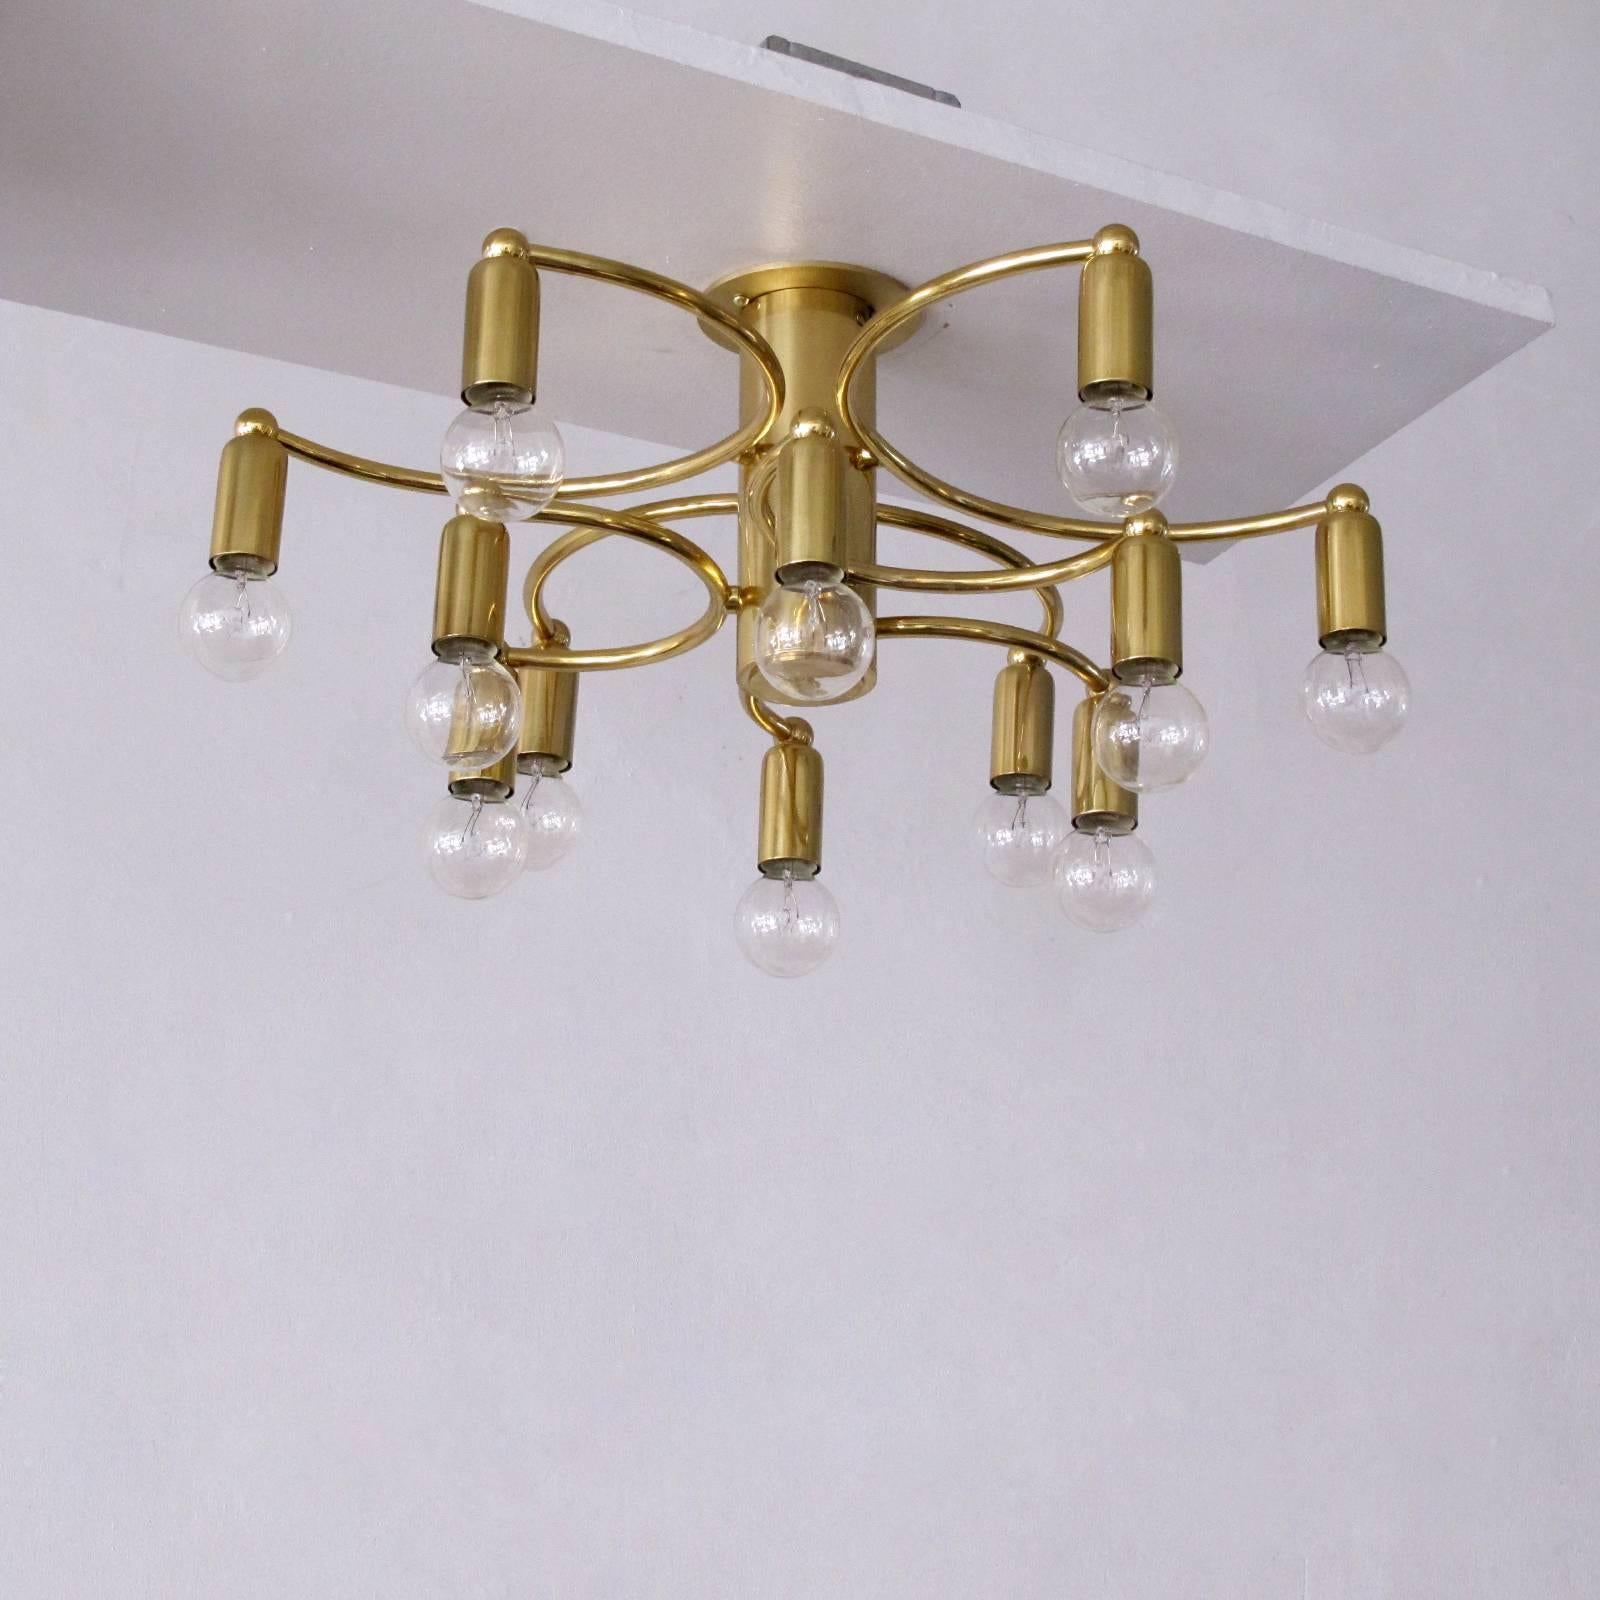 Wonderful brass twelve-light flush mount ceiling light in style of Gaetano Sciolari, with two tiers of three semi-circular arms, each equipped with two sockets on either end, can be used as wall sconce or ceiling light.